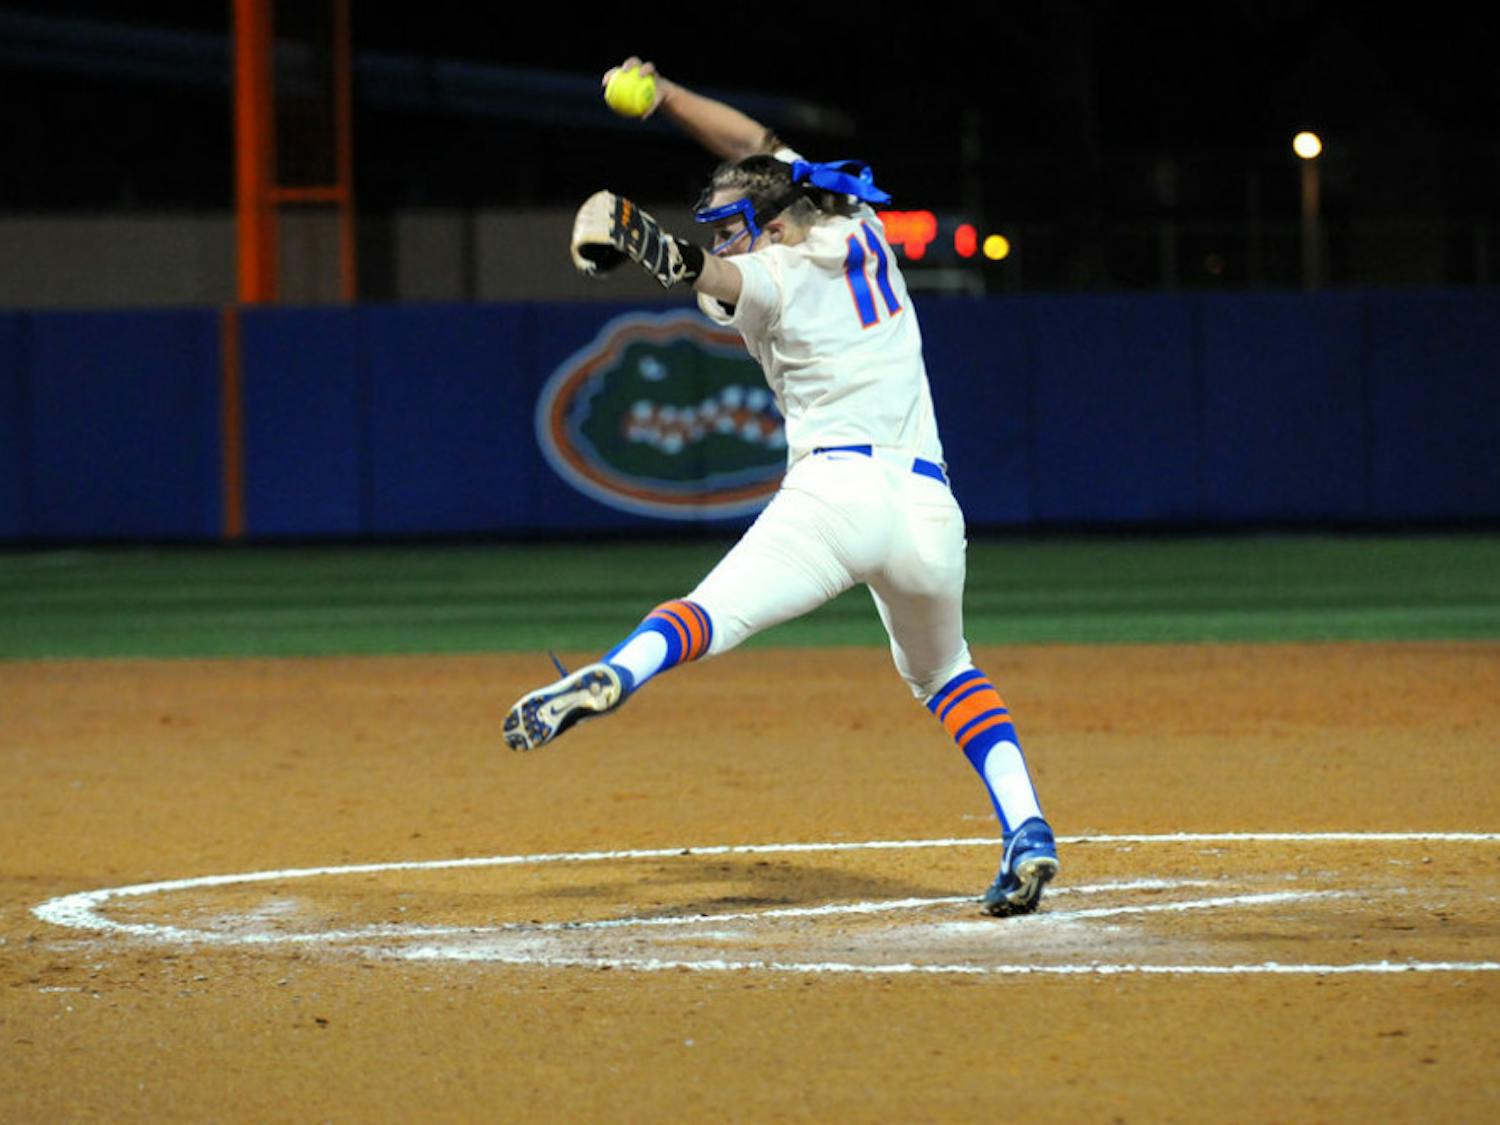 Kelly Barnhill pitches during UF's doubleheader sweep of Jacksonville on Feb. 27, 2016, at Katie Seashole Pressly Stadium.